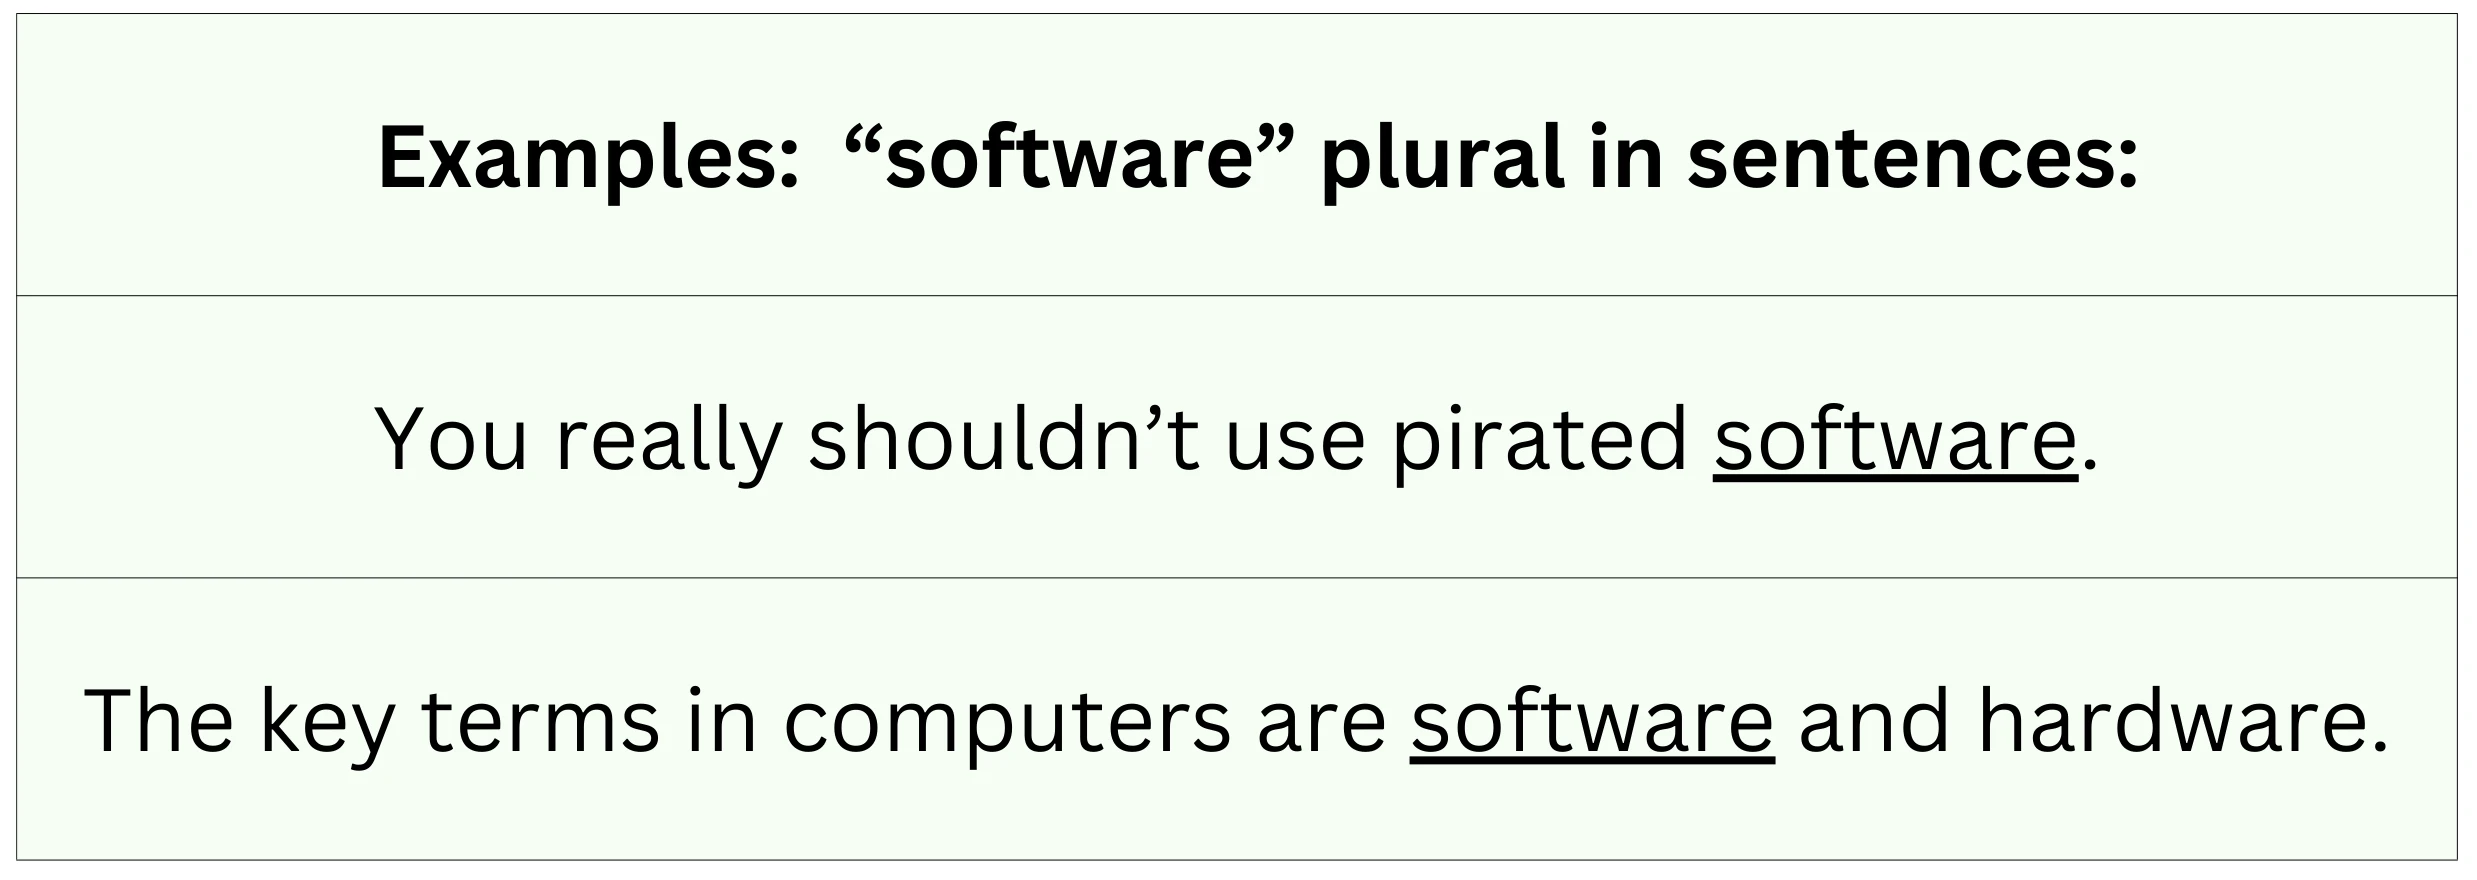 "Software" used as a plural noun in sentences.